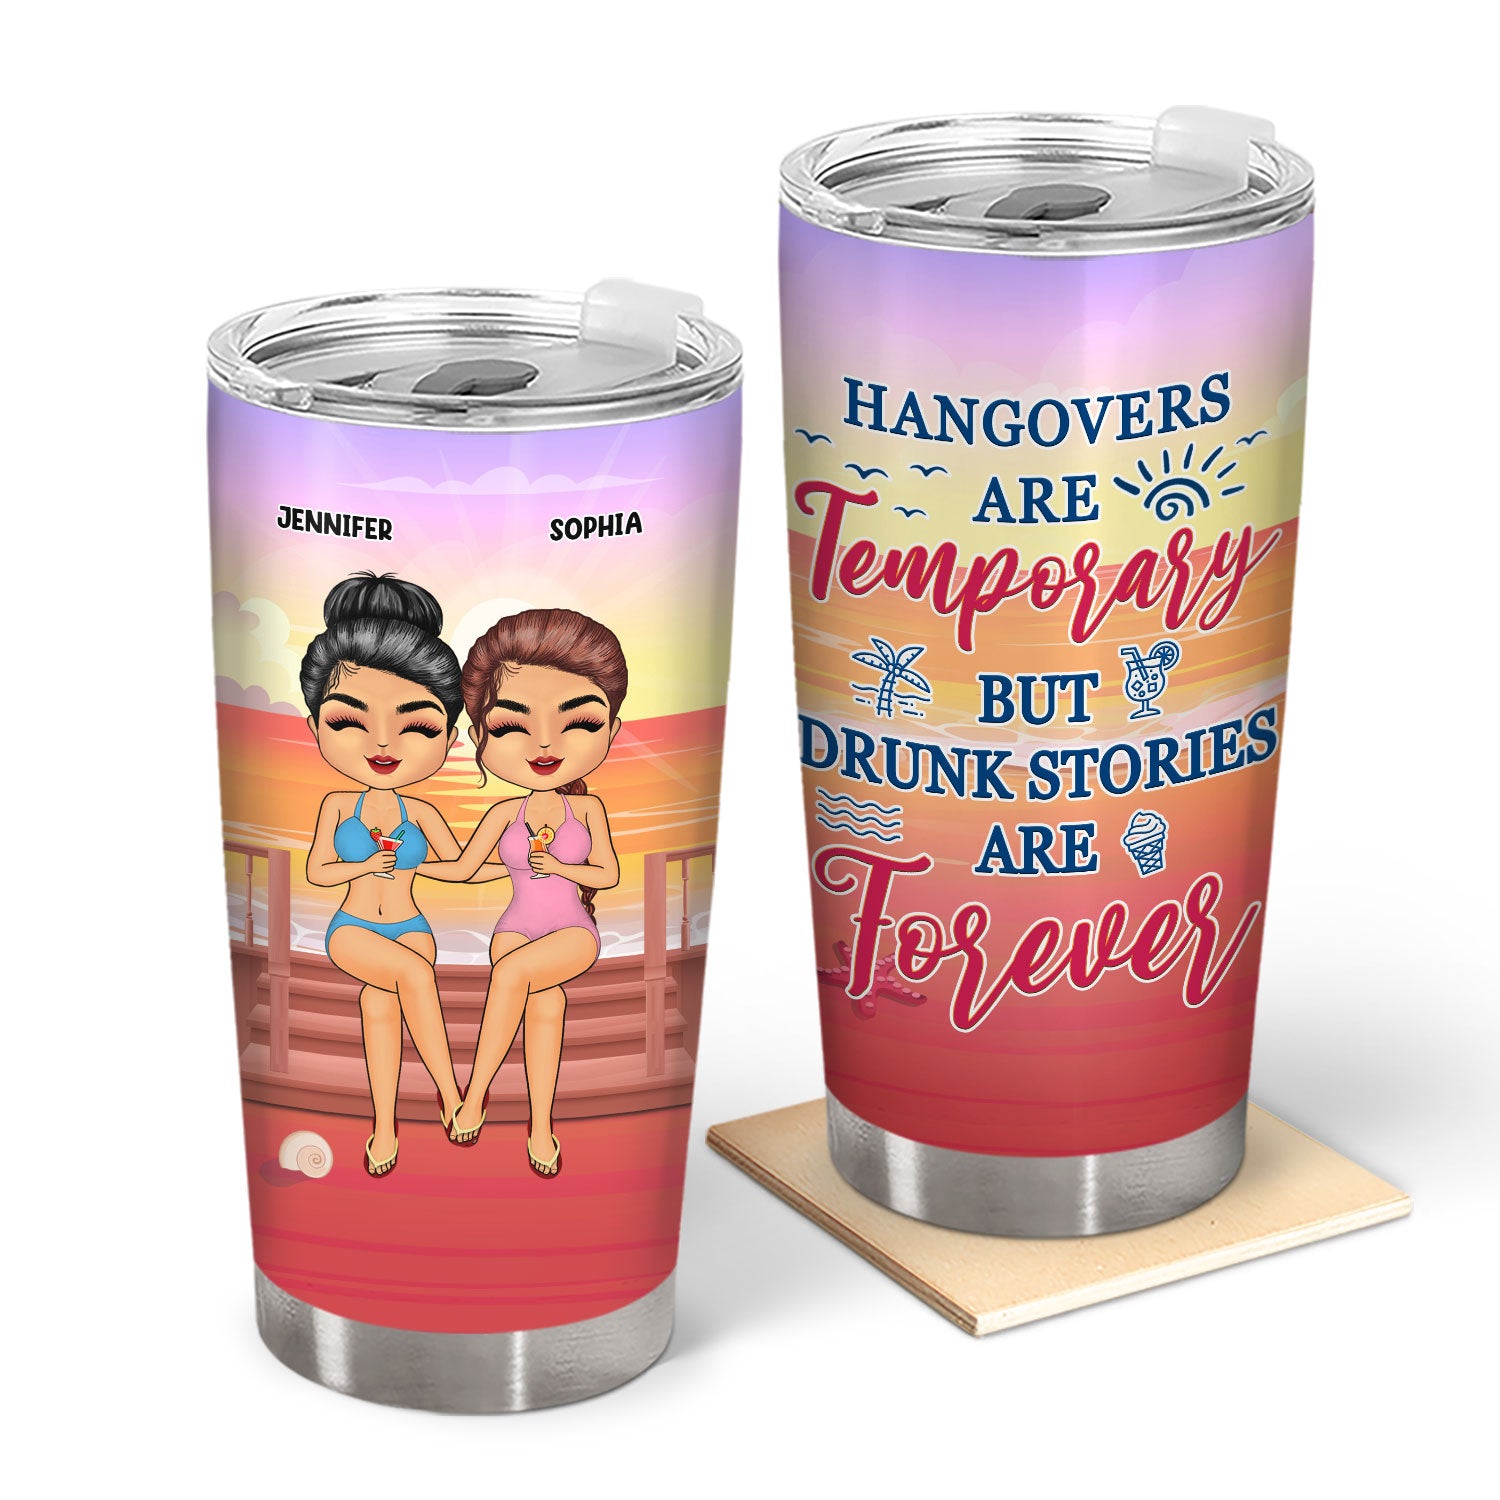 Hangovers Are Temporary But Drunk Stories Are Forever - Gift For BFF Besties, Sisters, Siblings - Personalized Custom Tumbler